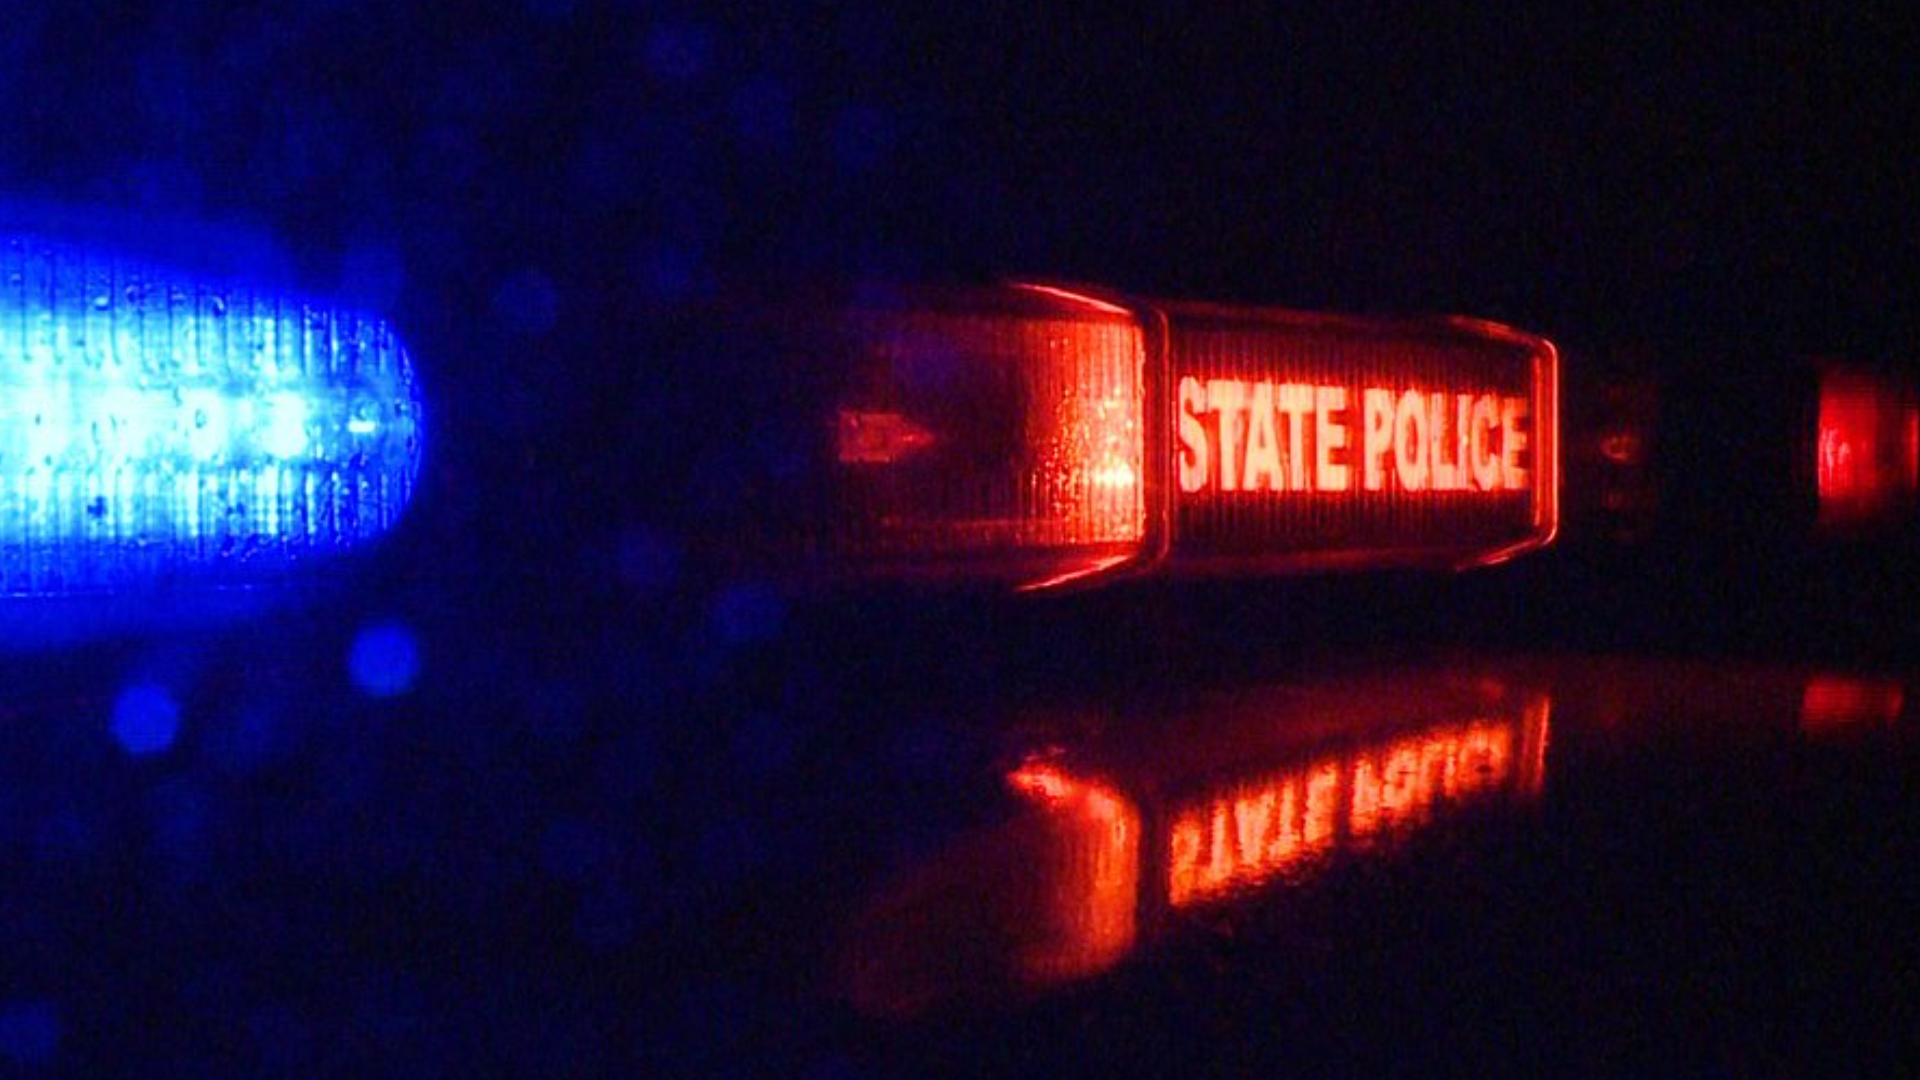 According to state police, one person died after being hit by a Ram 5500 on the highway.